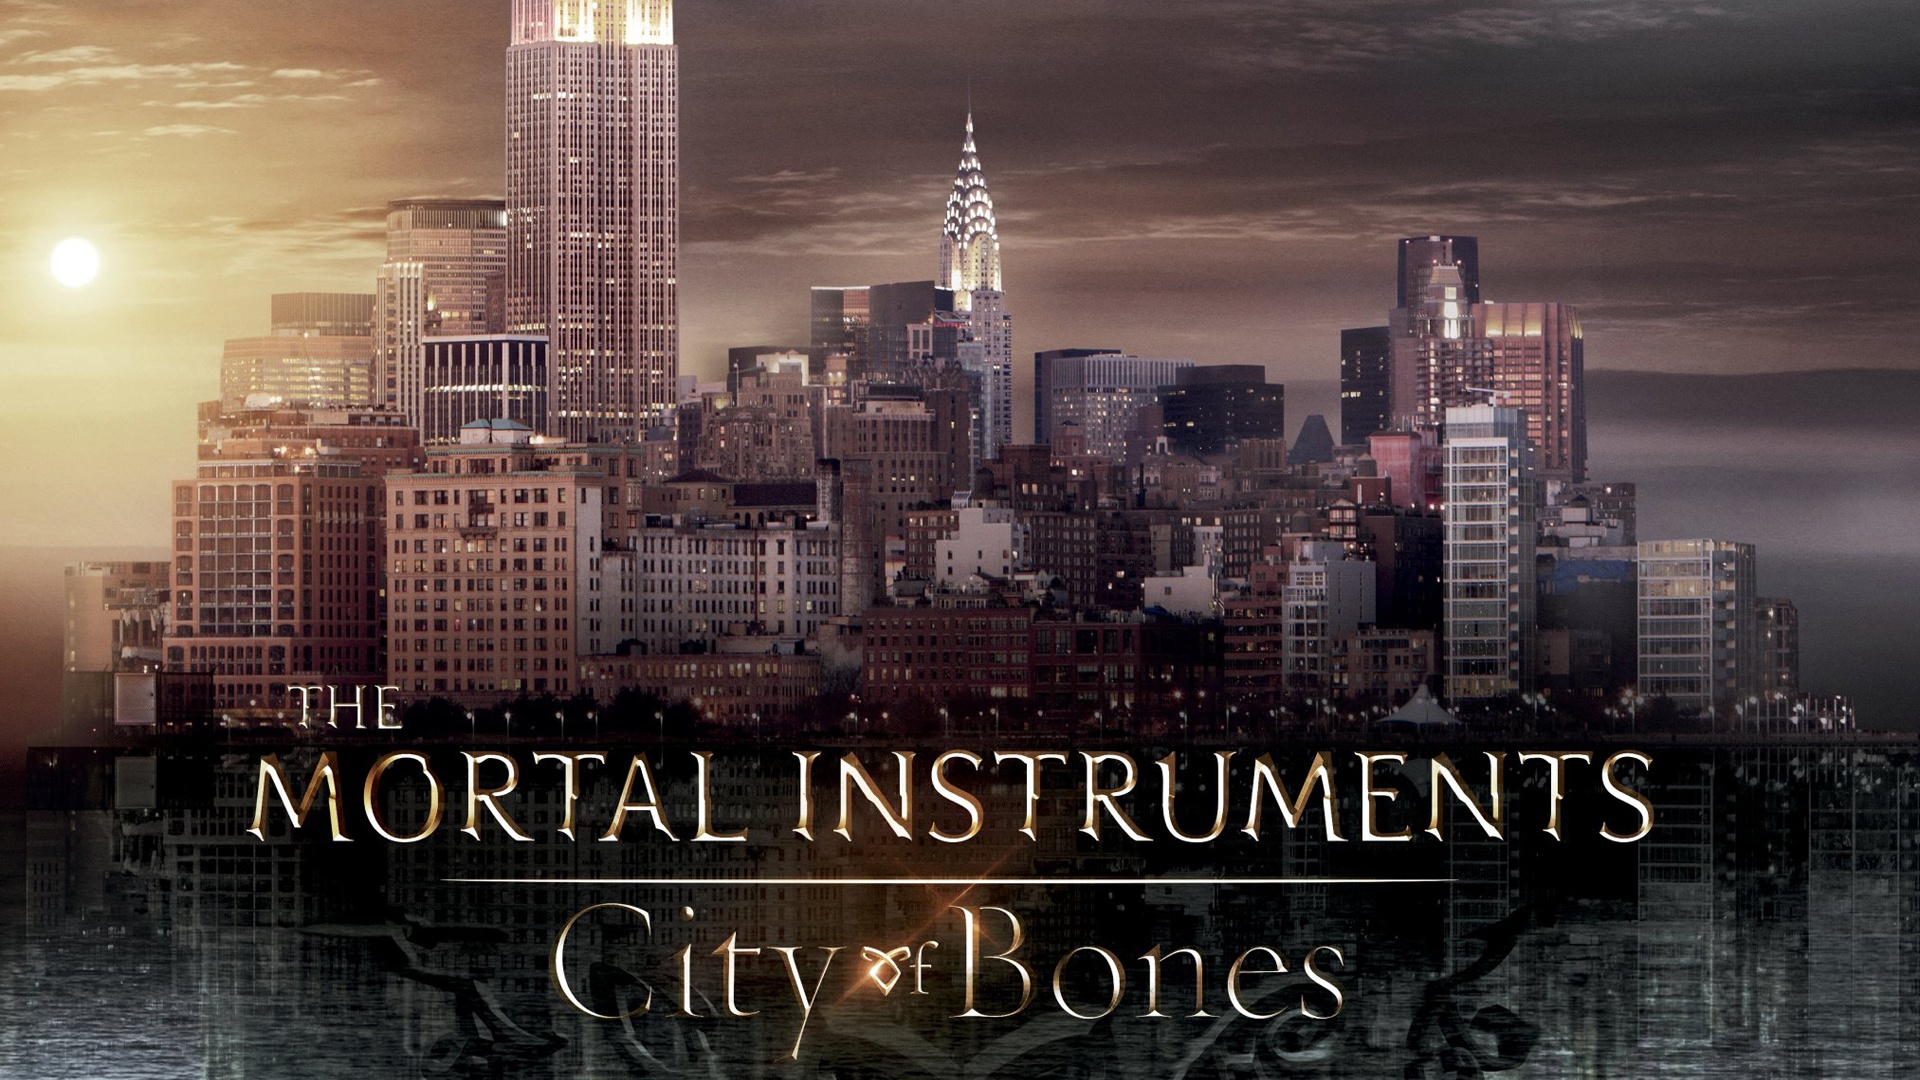 Movies Shows Amp Books The Mortal Instruments City Of